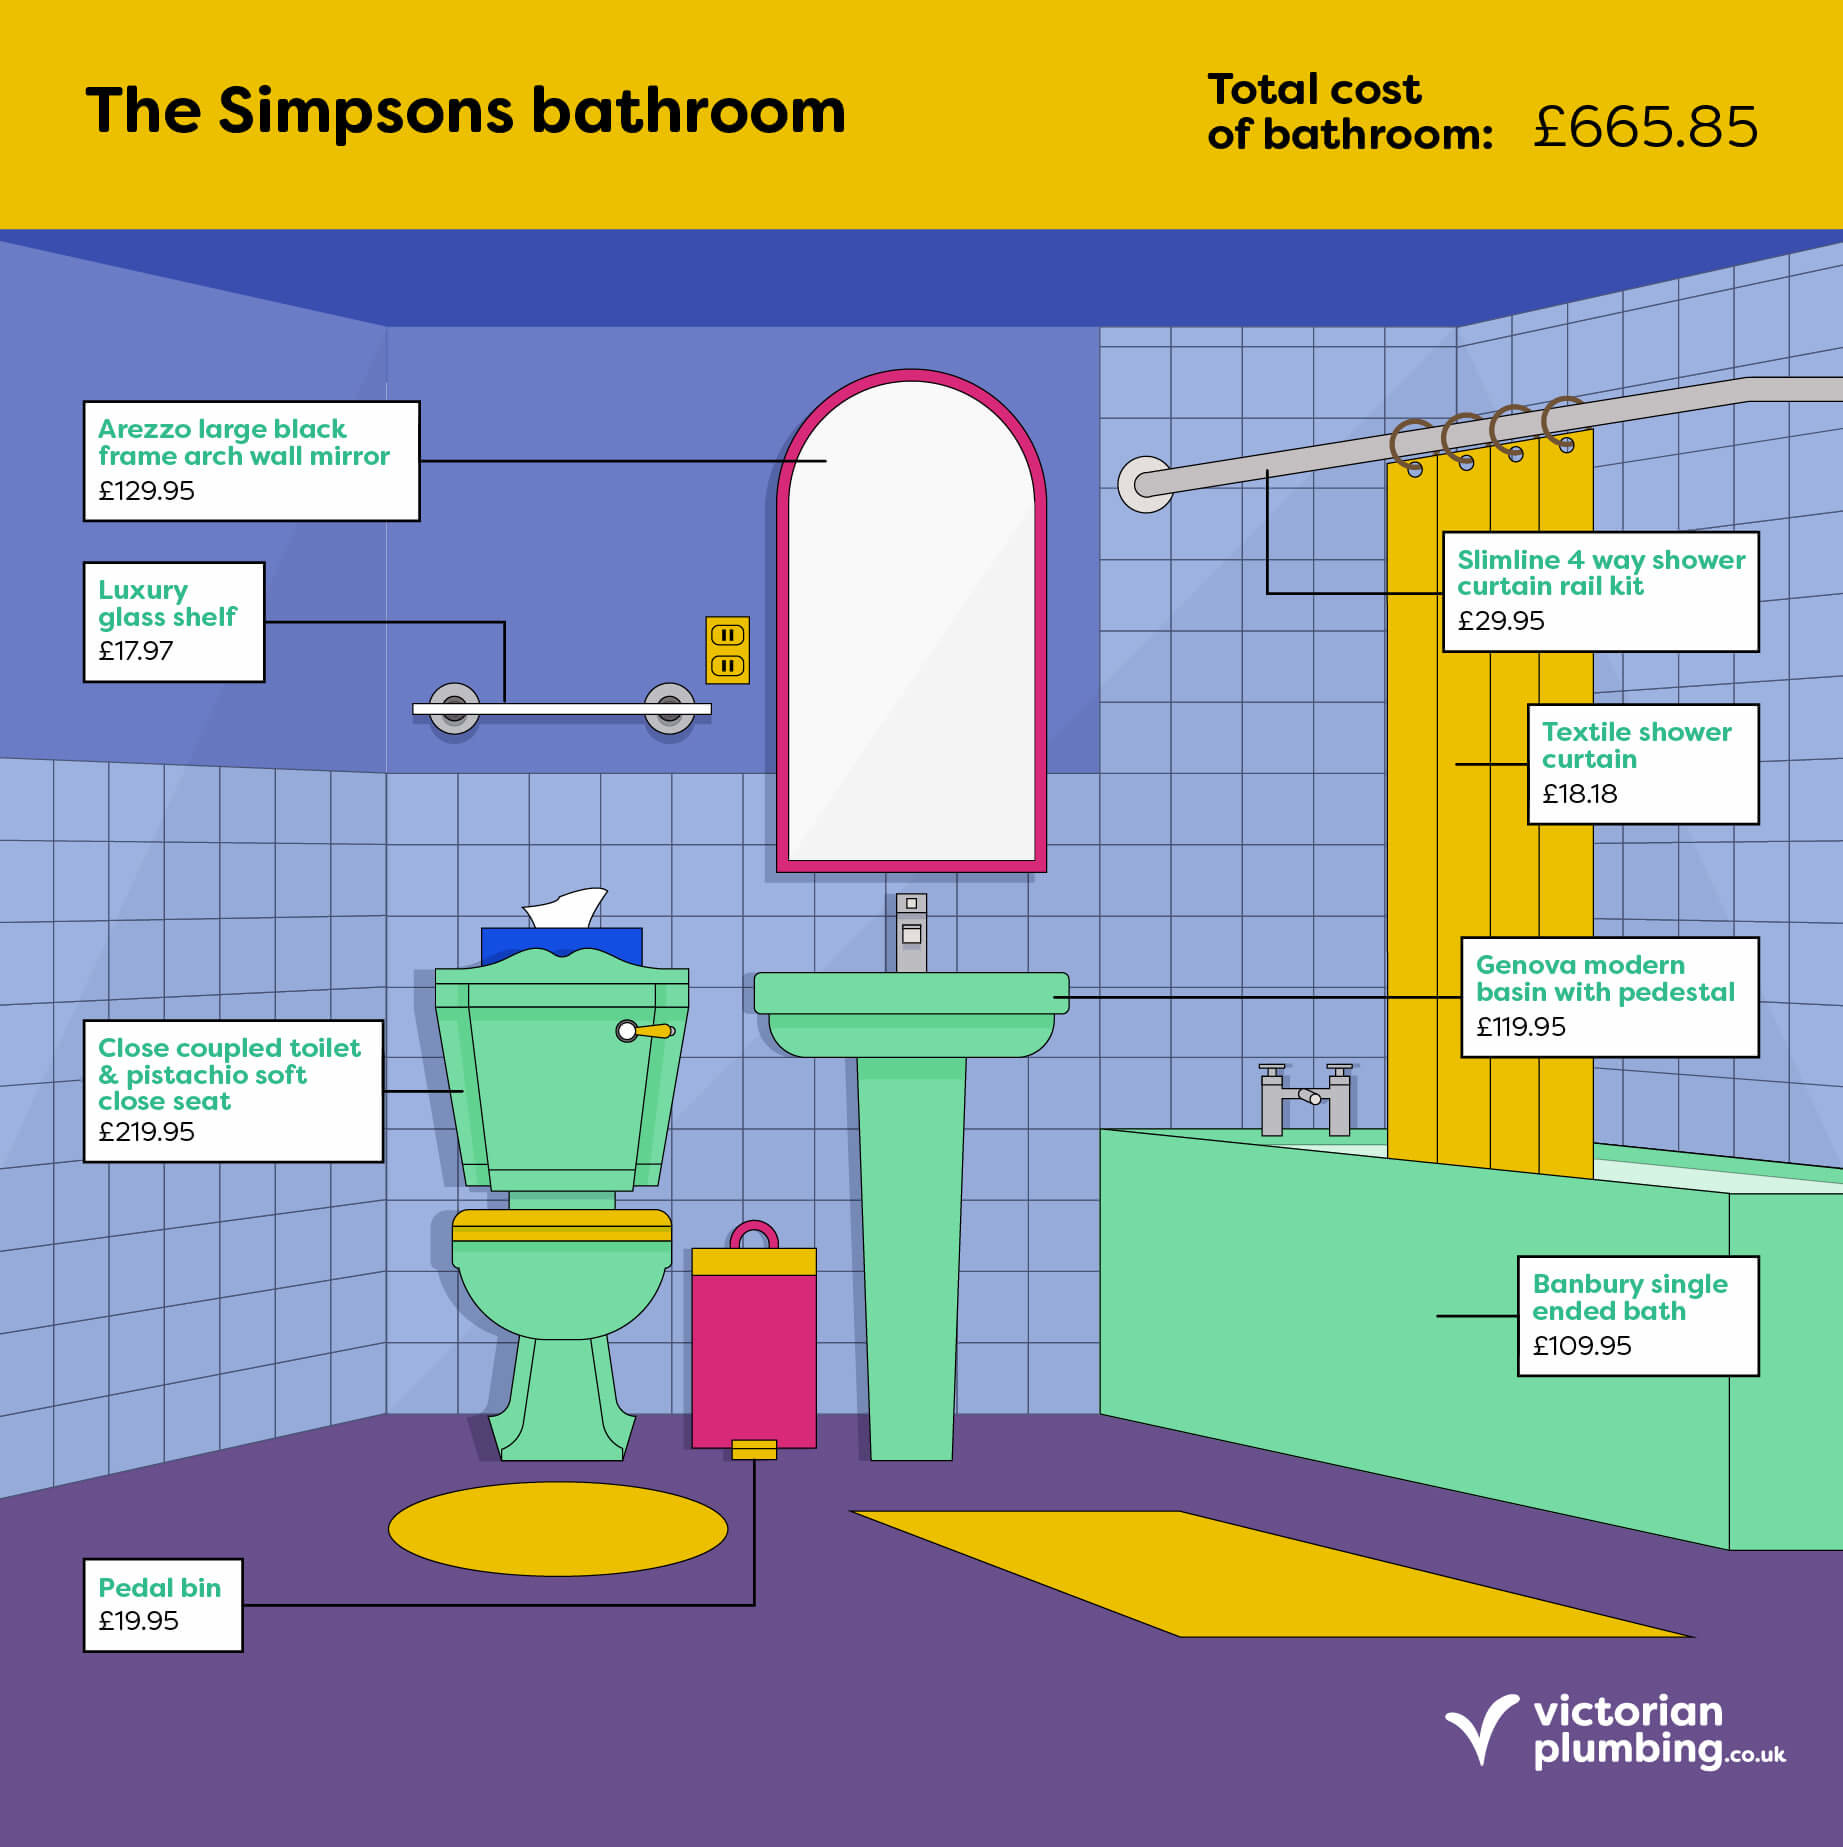 Fictional Bathrooms: The Simpsons